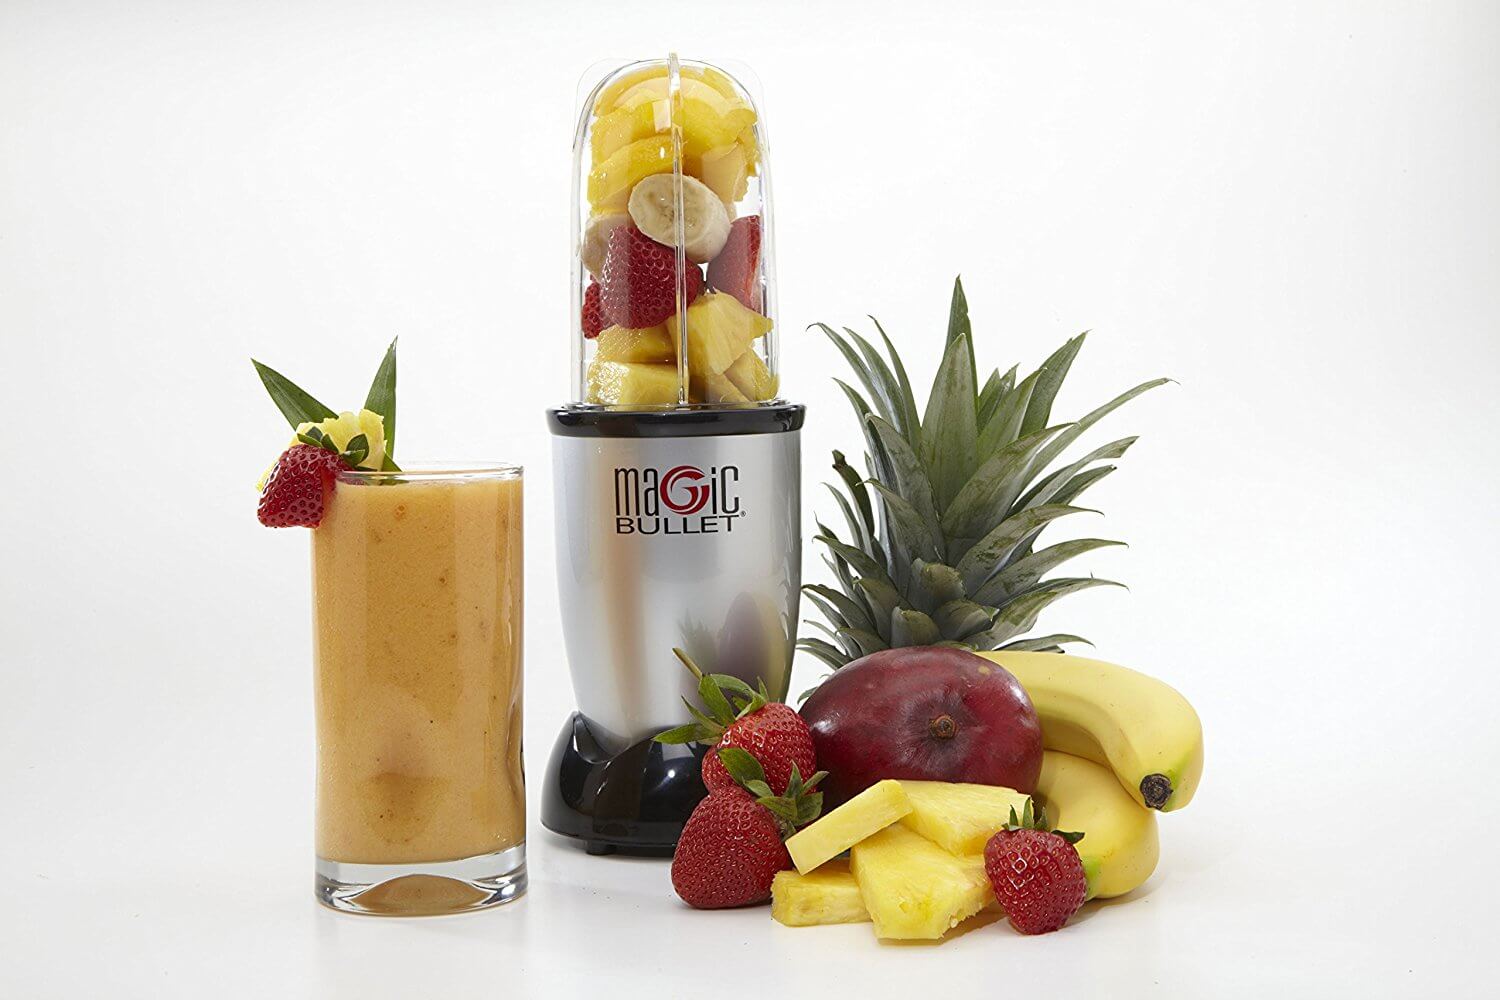 Magic Bullet MBR-1101 with a Compact Design, Impressive Performance and a Low Durability